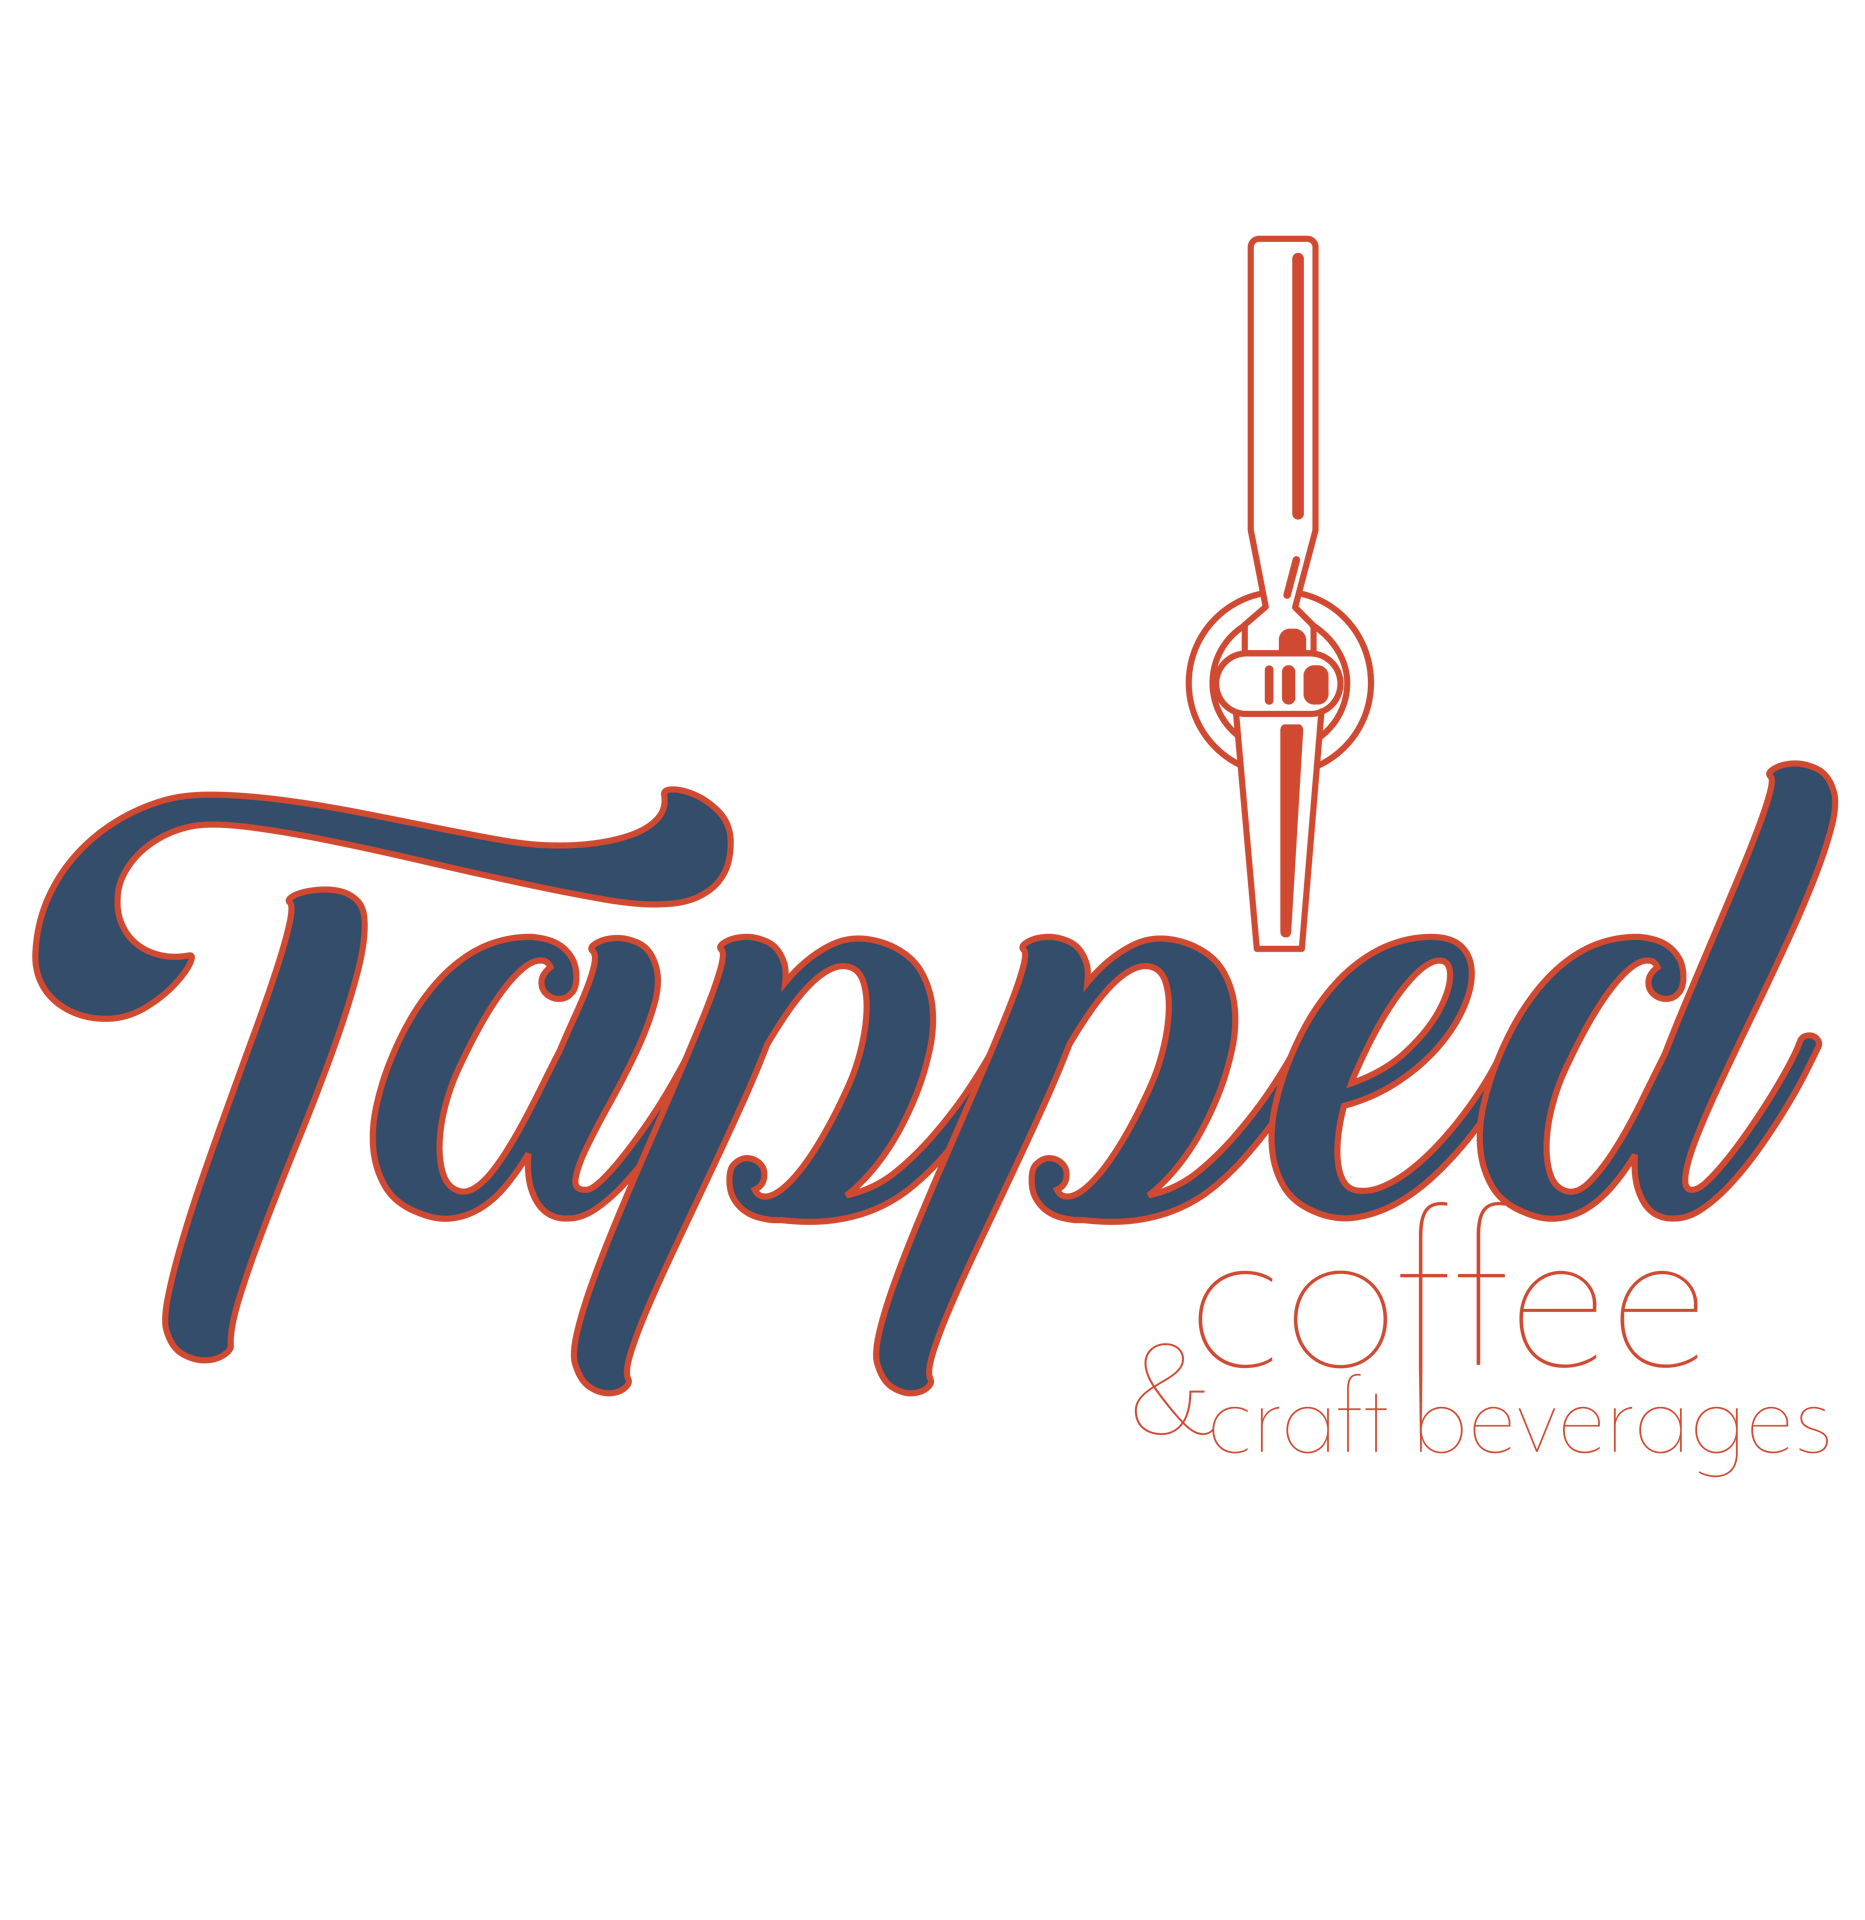 Tapped Coffee & Craft Beverages logo